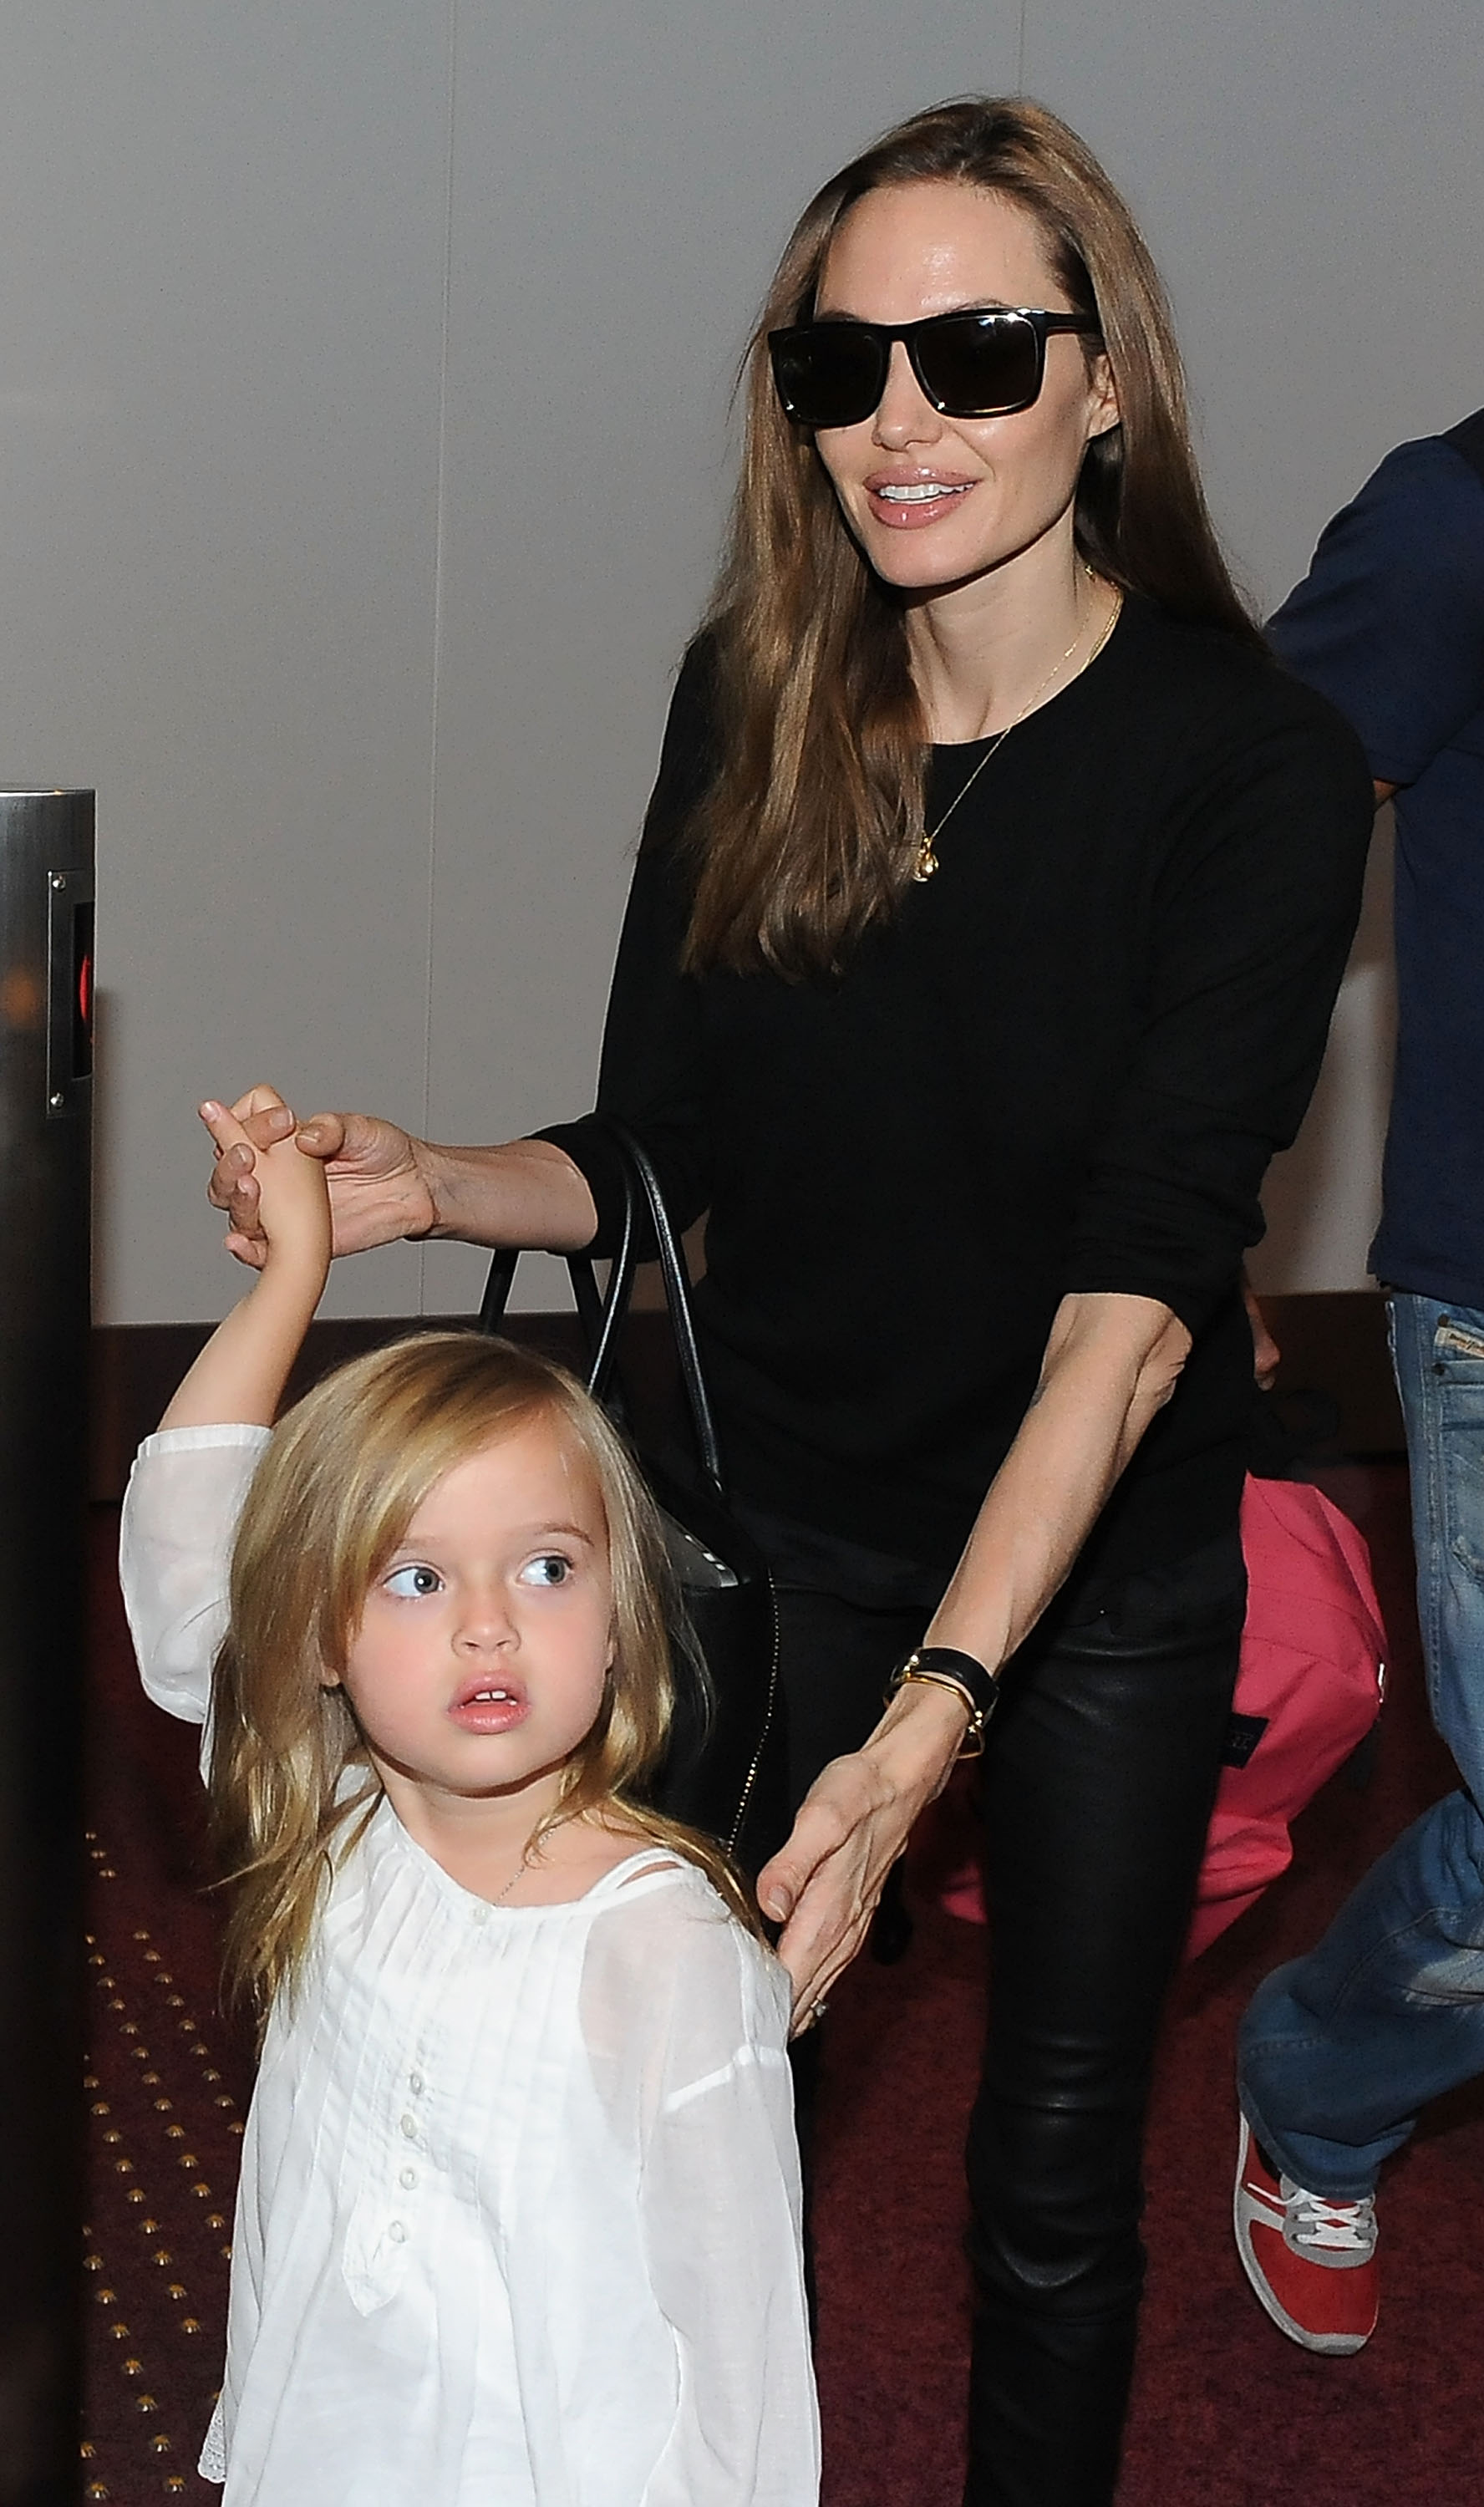 Angelina Jolie and her daughter Vivienne Jolie-Pitt at Tokyo International Airport in Tokyo, Japan on July 28, 2013 | Source: Getty Images